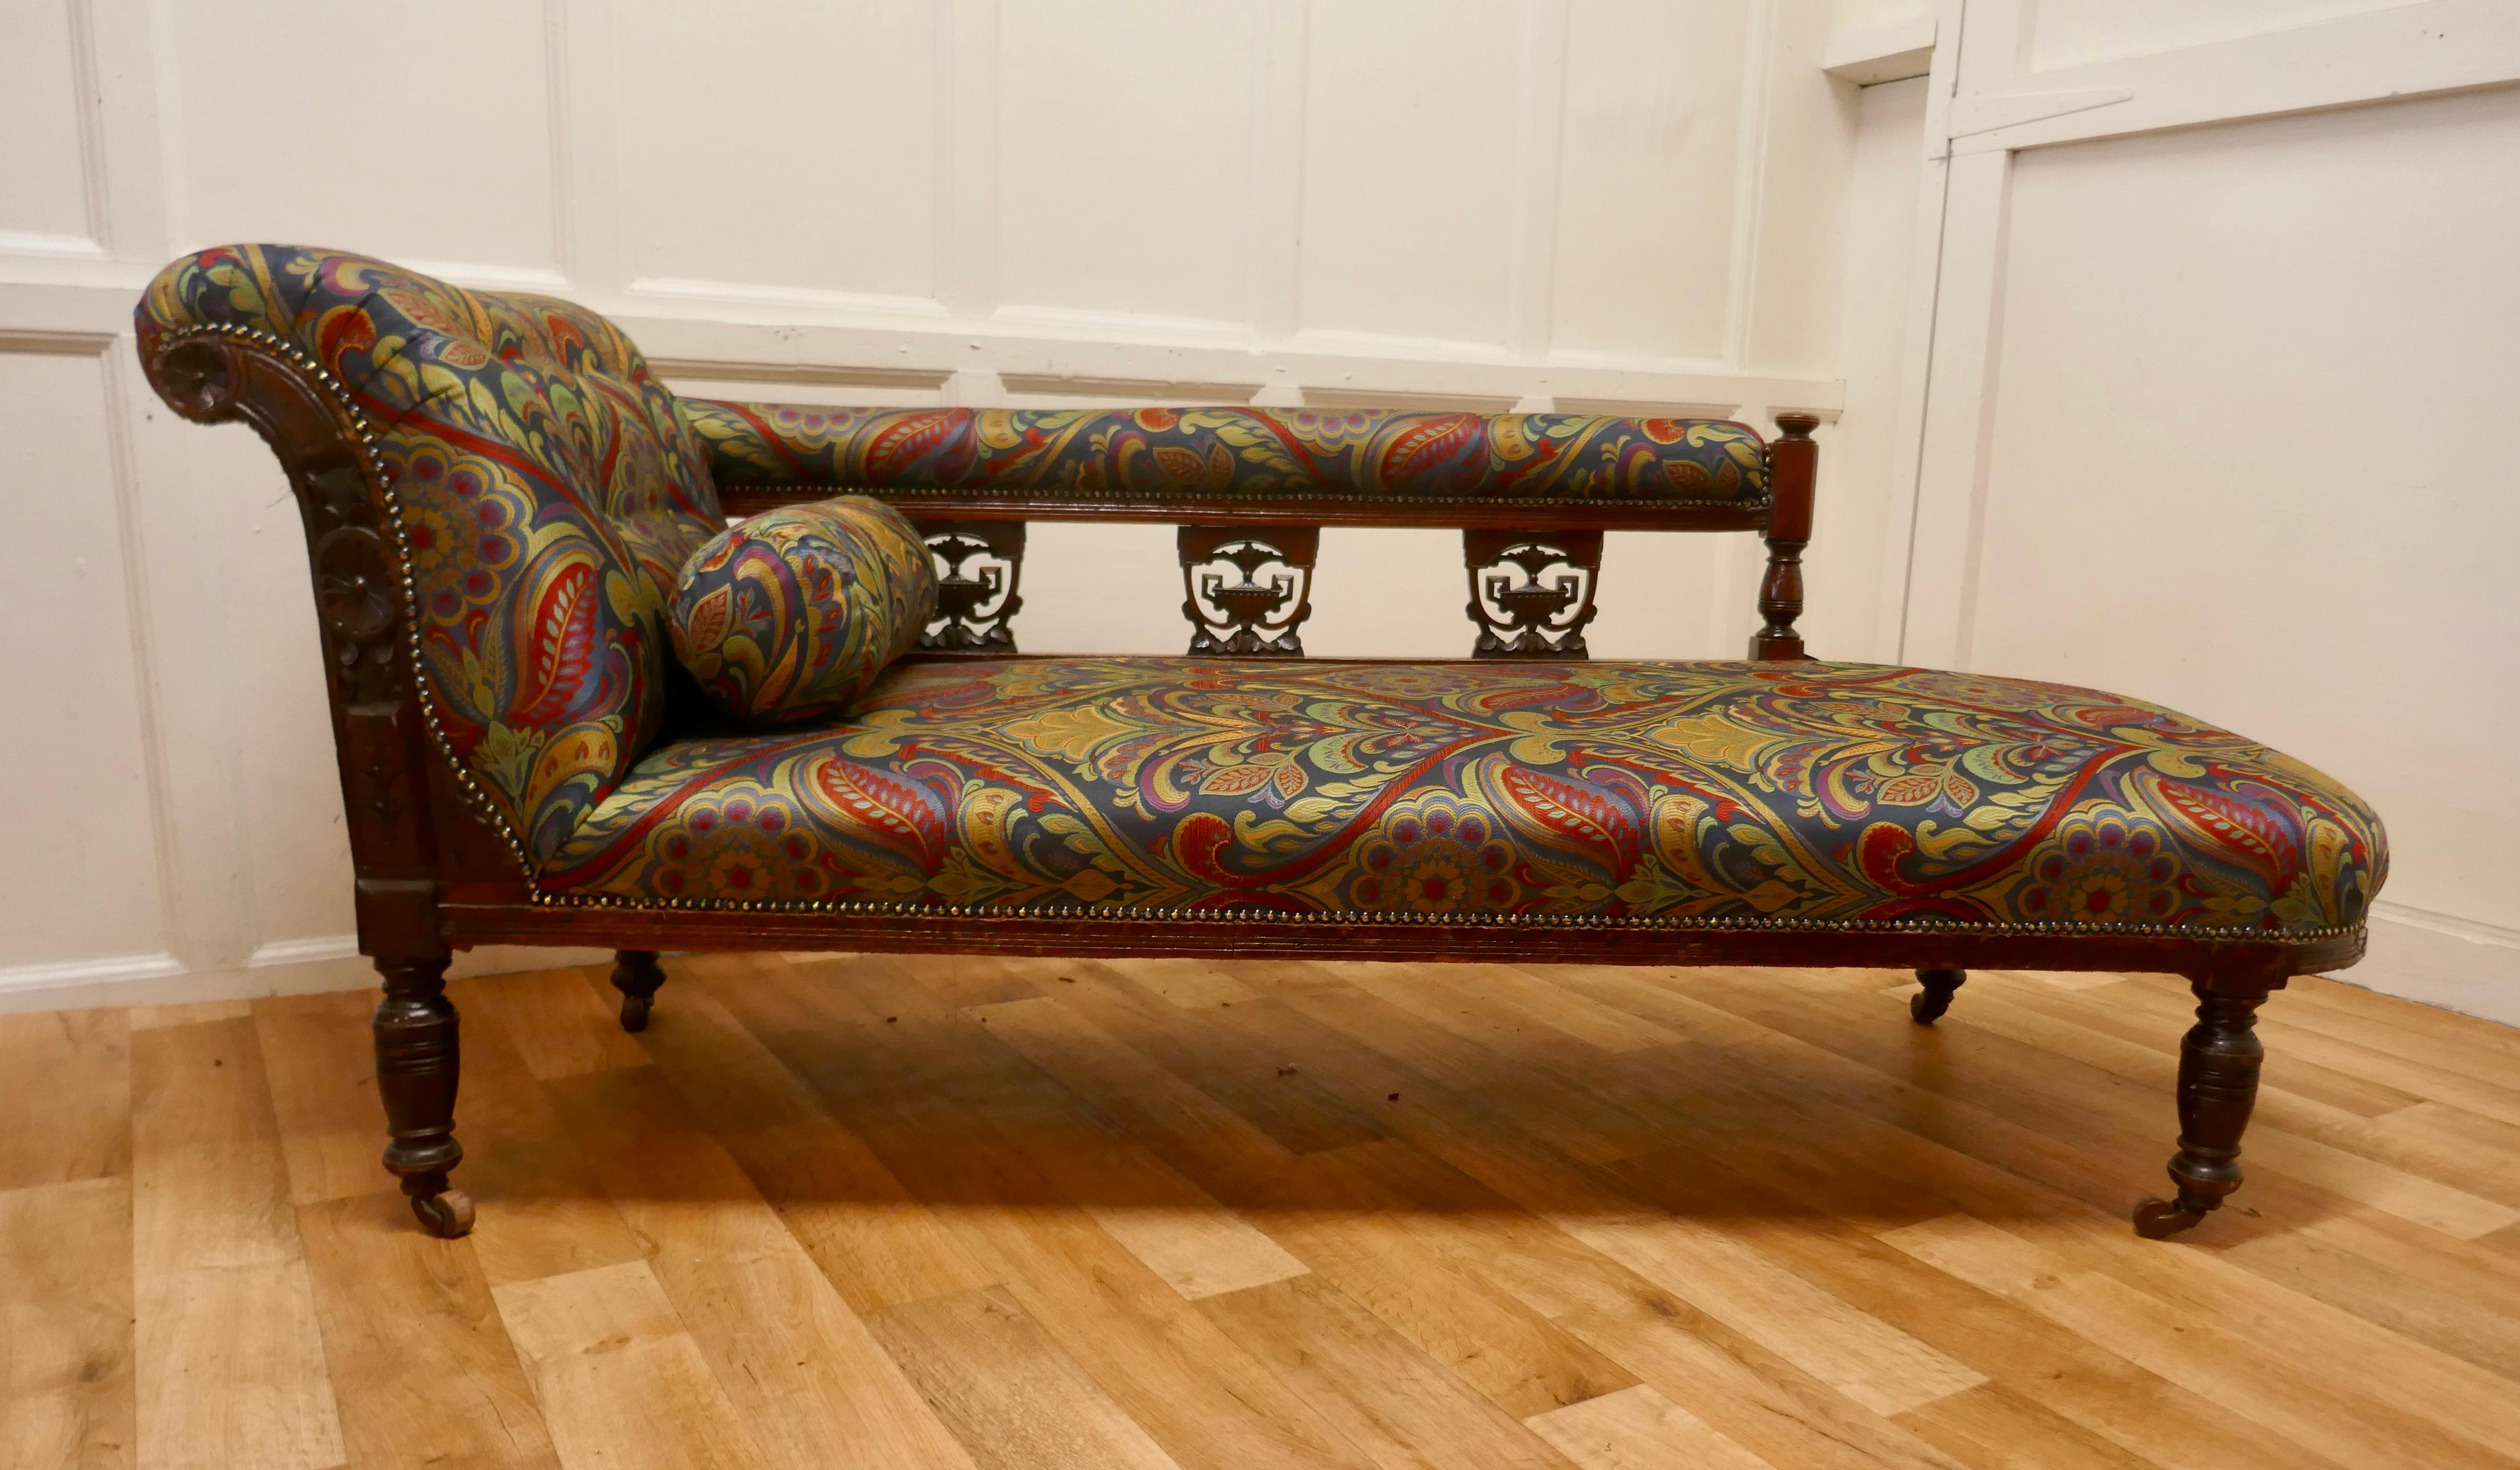 Victorian Art Nouveau upholstered chaise longue.

This is a very attractive sofa it has been newly upholstered with an extra thick Heavyweight Jacquard Fabric, a superb Art nouveau design, Jewel coloured and the design is known as Chastleton